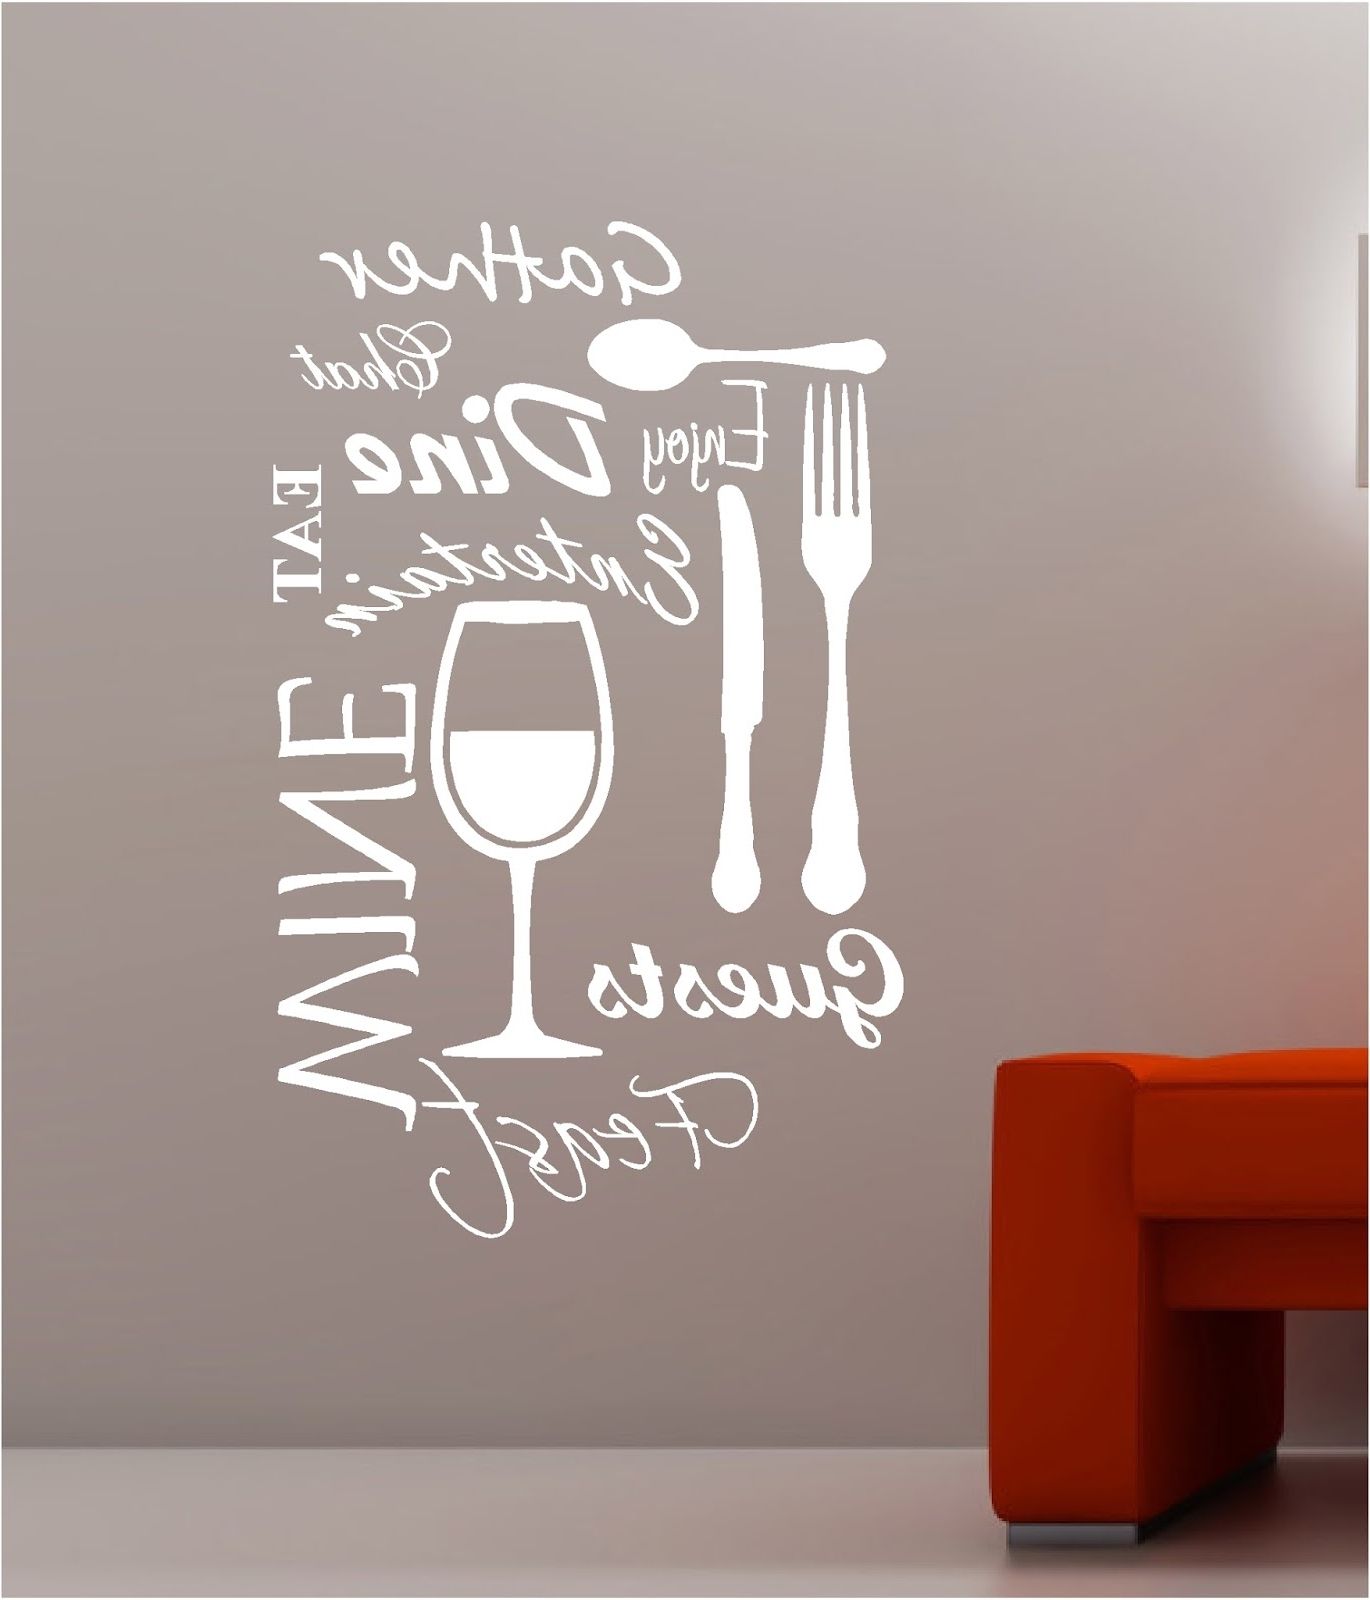 Cool Kitchen Wall Art Inside Most Current Wall Art Designs: Kitchen Wall Art Home Design Ideas Wall Decor (View 1 of 15)